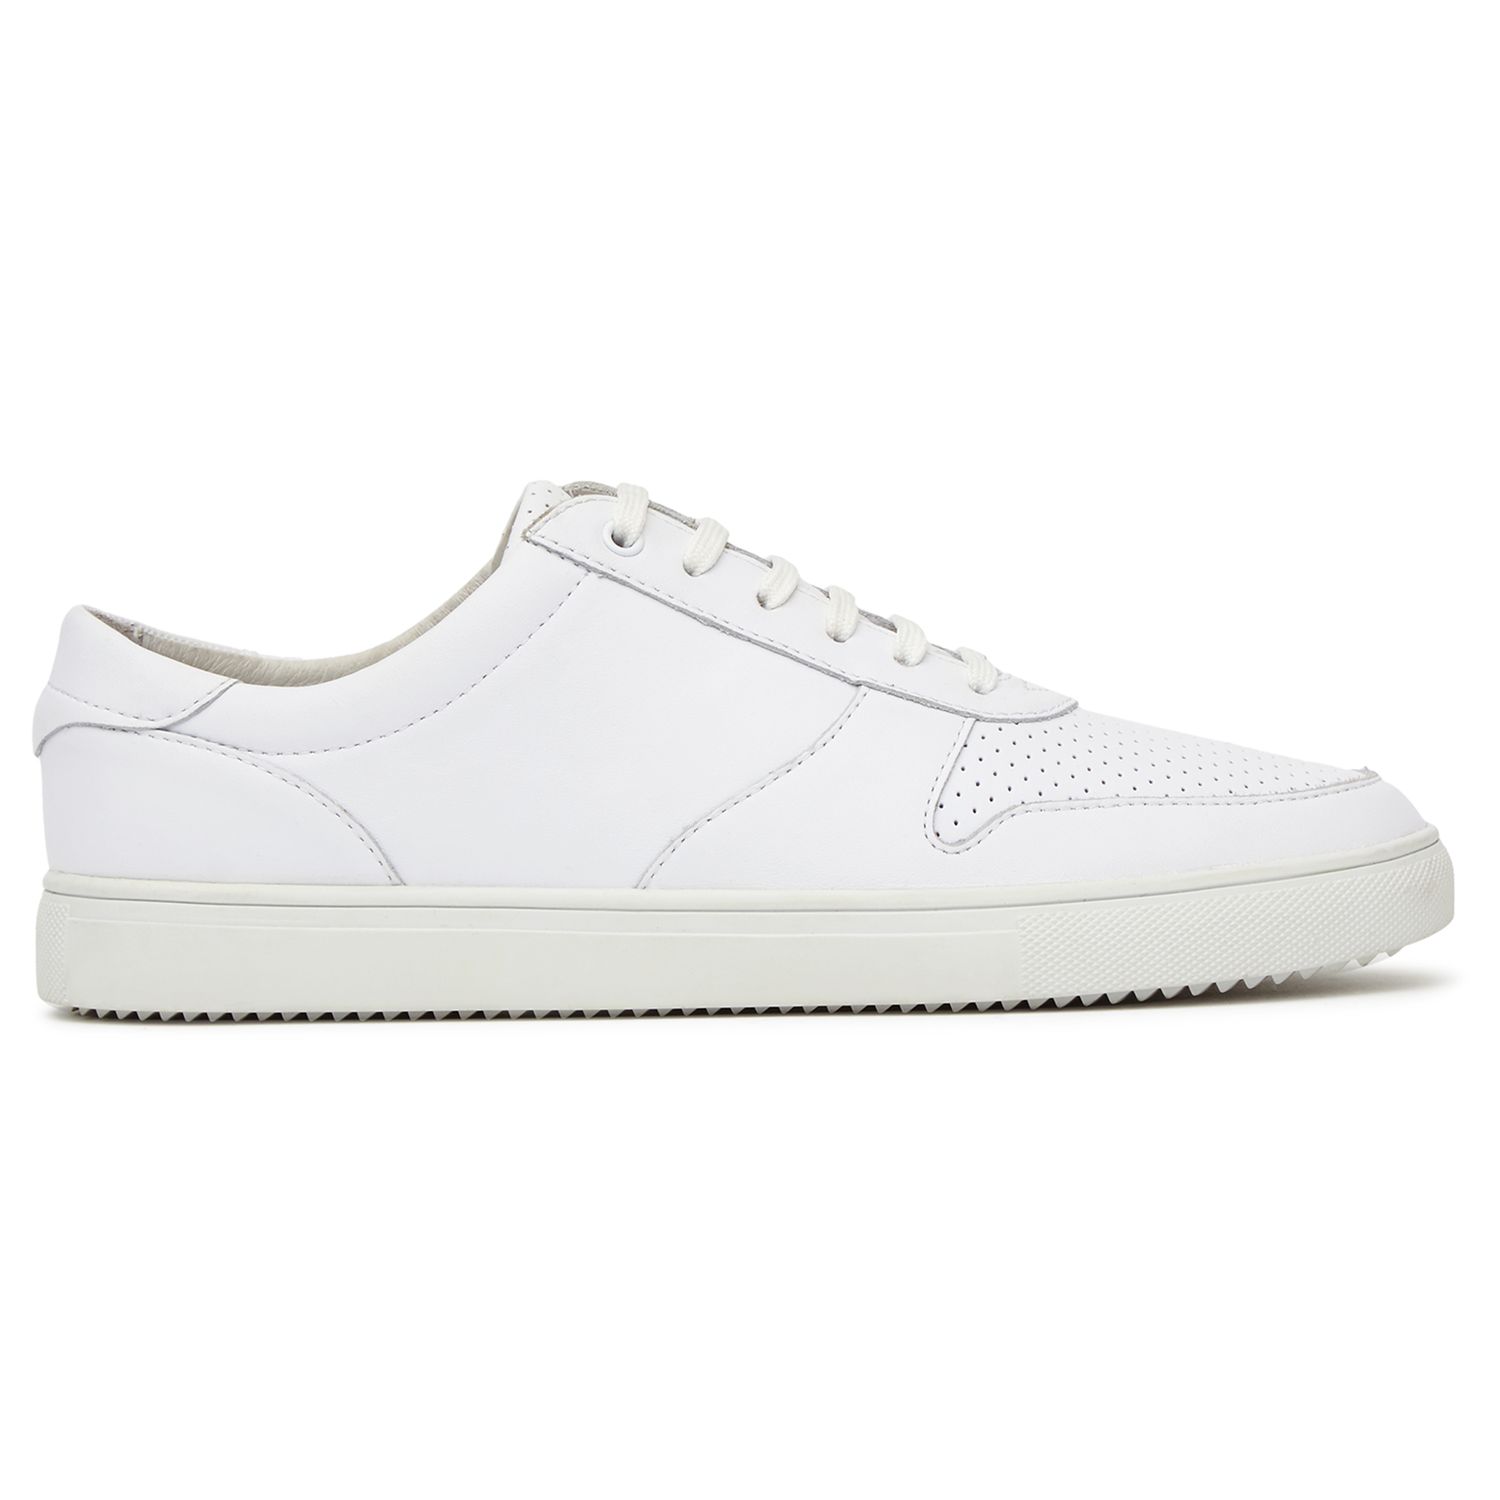 Reiss Gregory Clae Leather Trainers